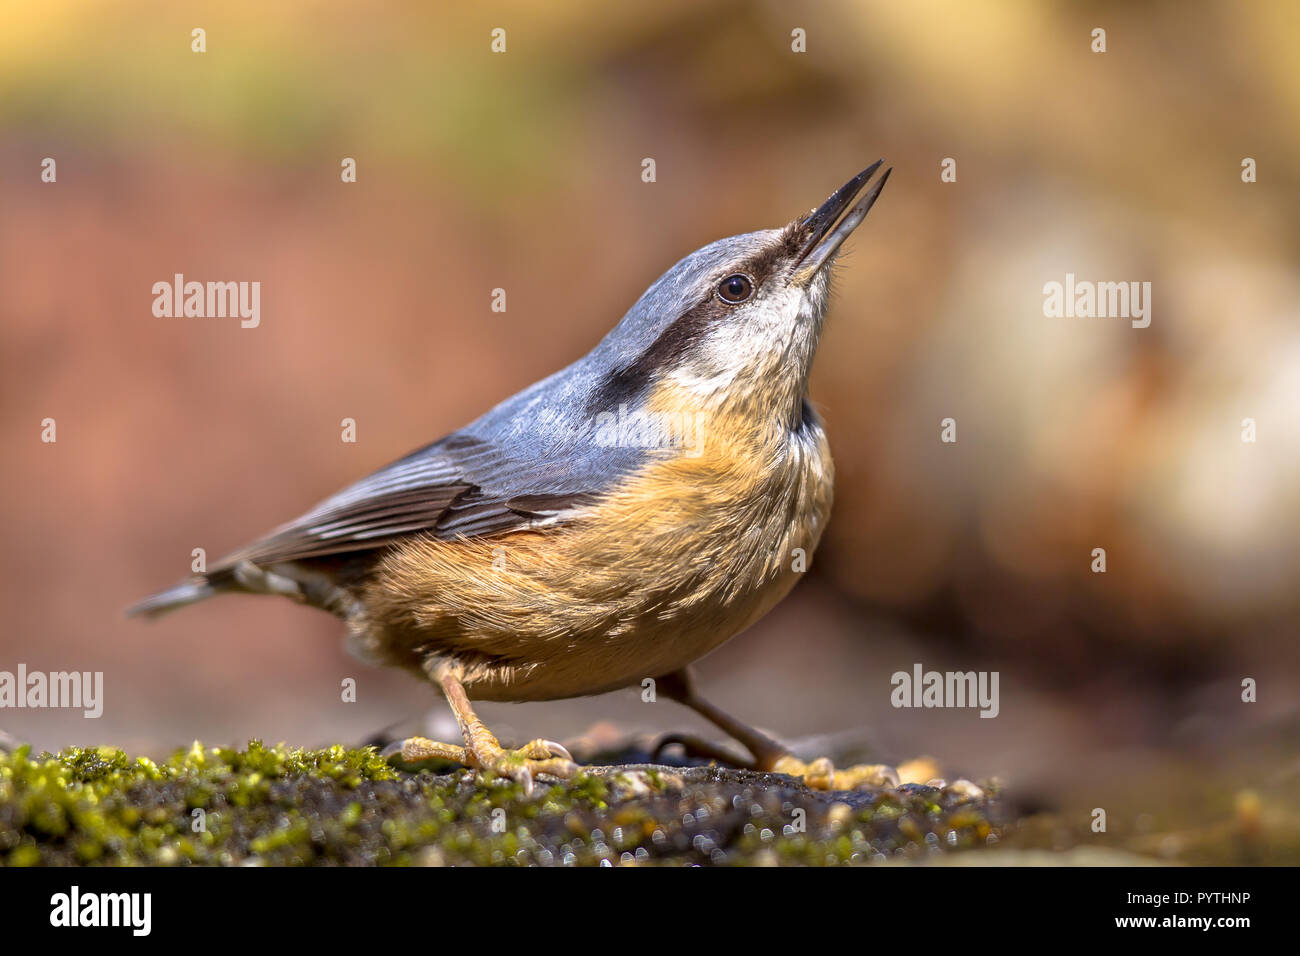 European Nuthatch (Sitta europaea) on the forest floor in typical pose. This bird is a memeber of the woodpecker family. Stock Photo